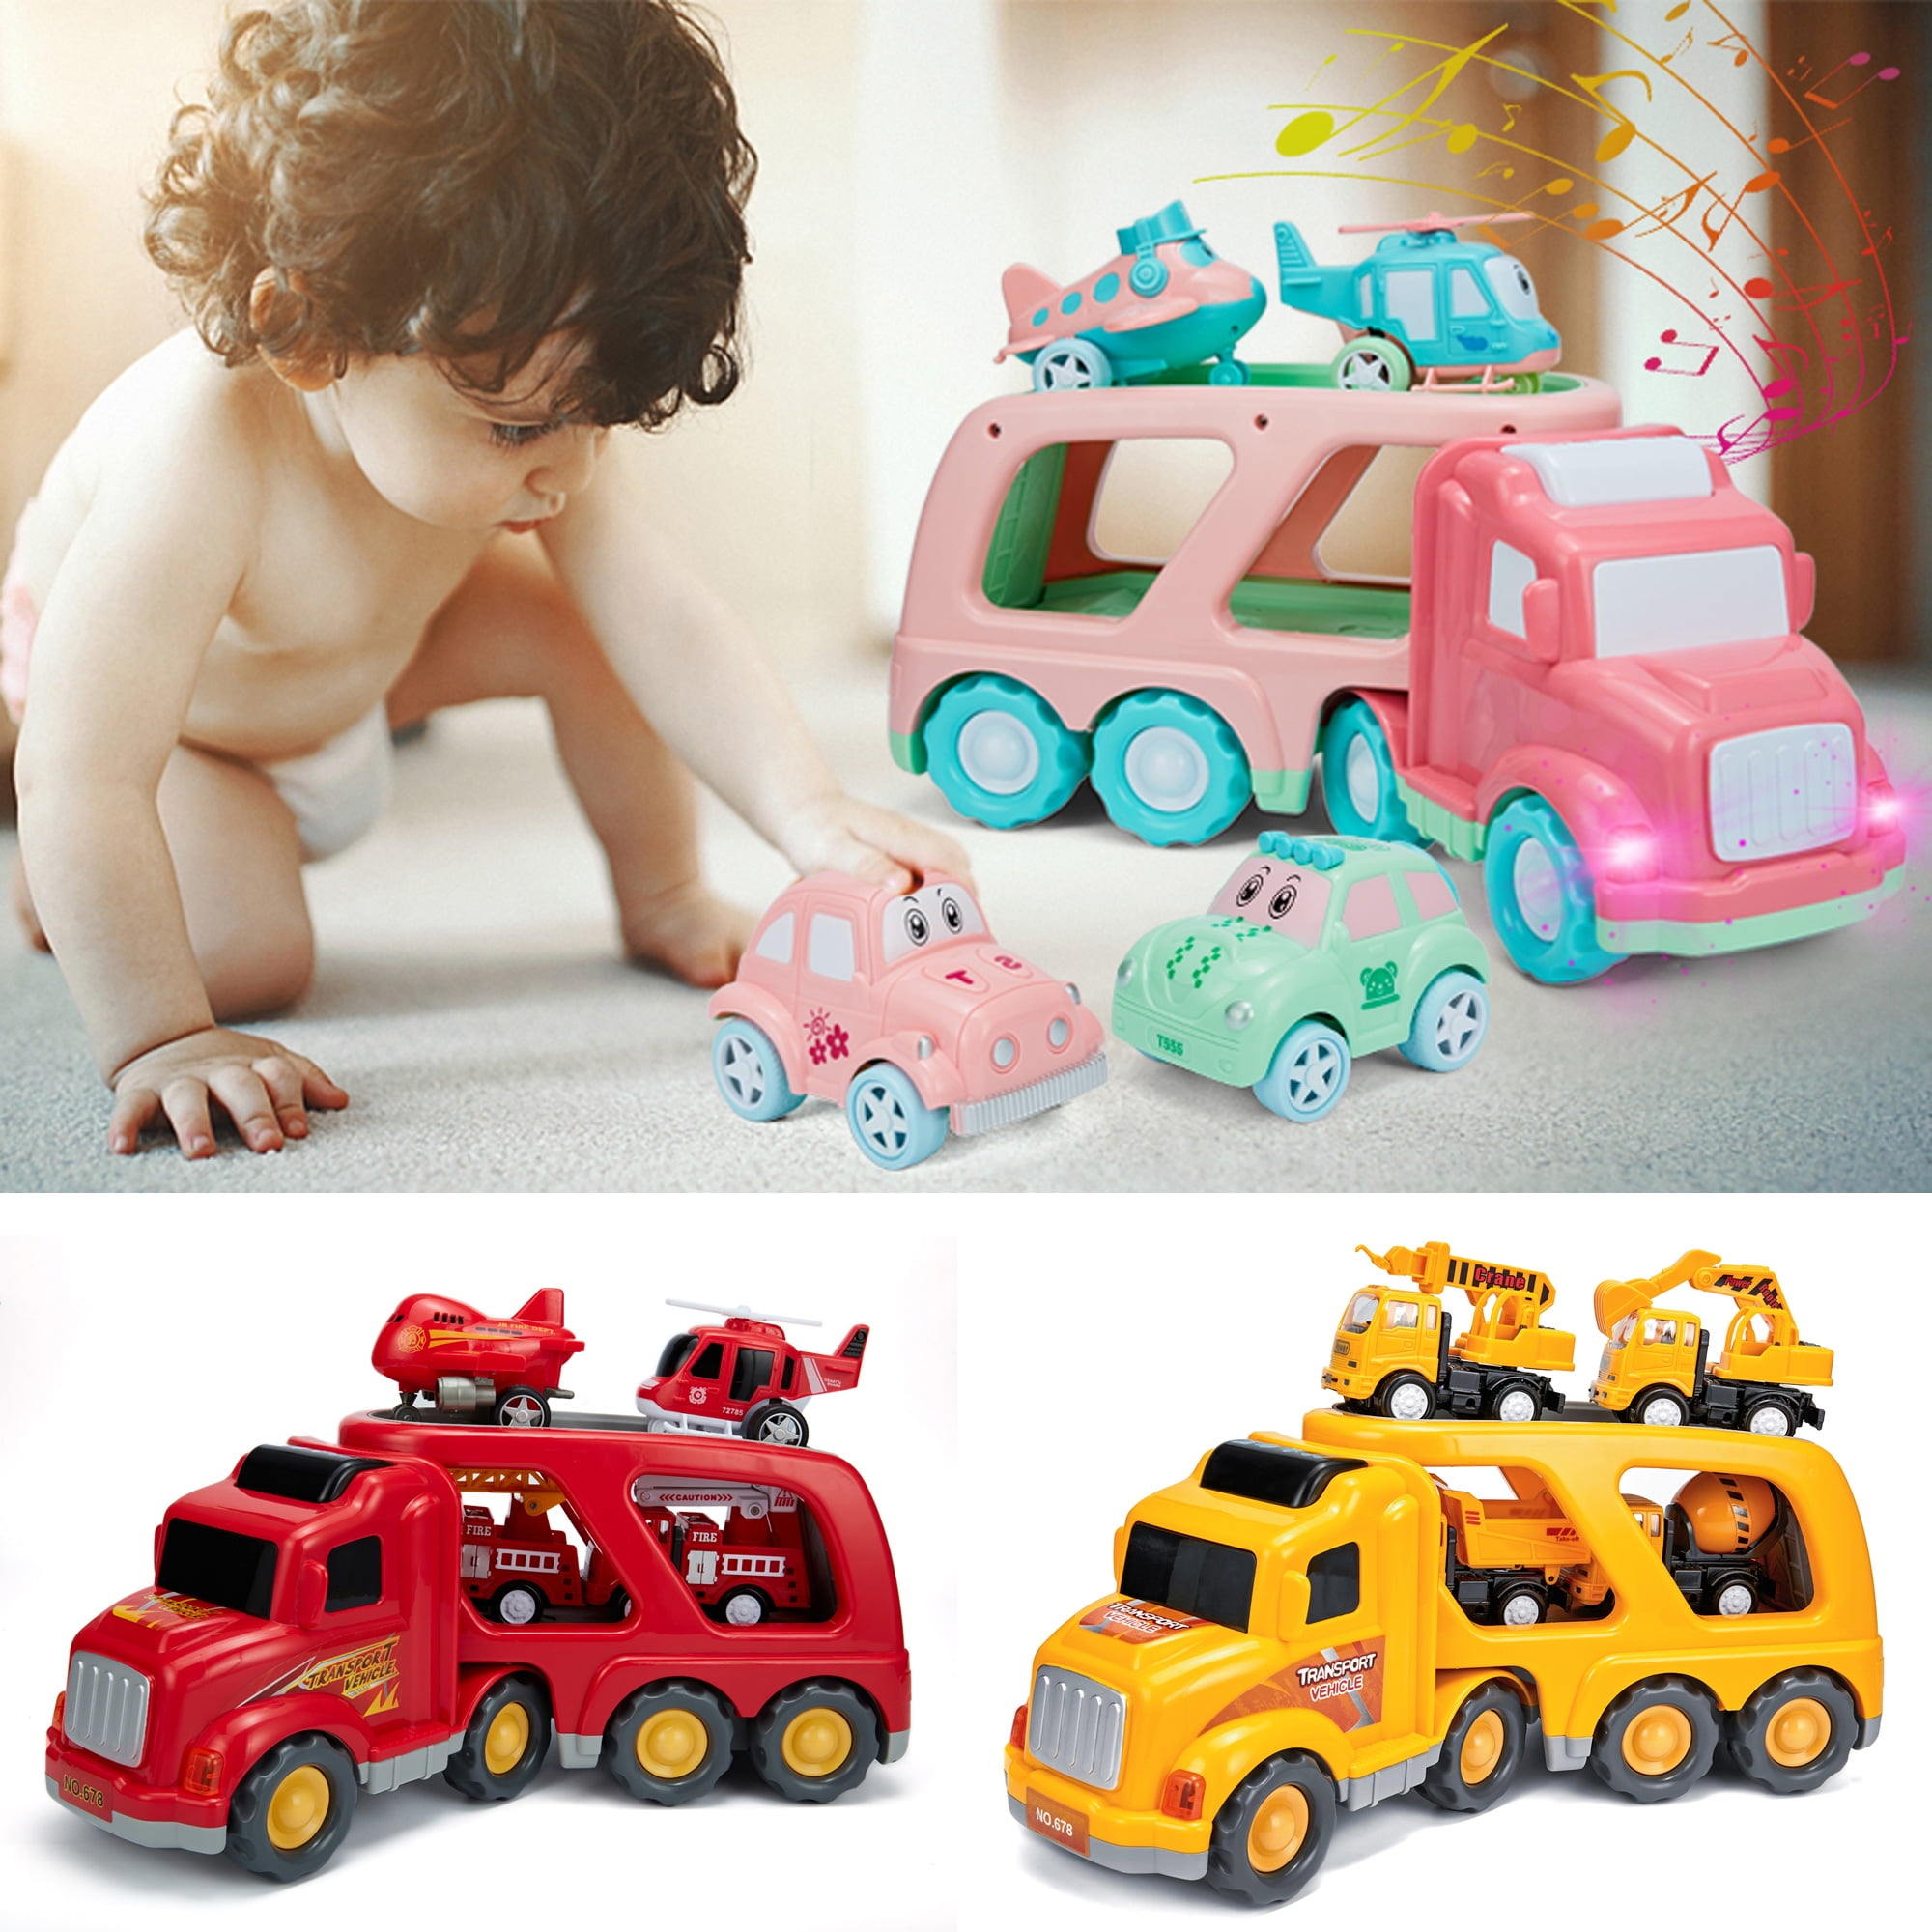 3 Set of 5 IN 1 Cartoon Vehicles Playset Transport Car Carrier Truck ...